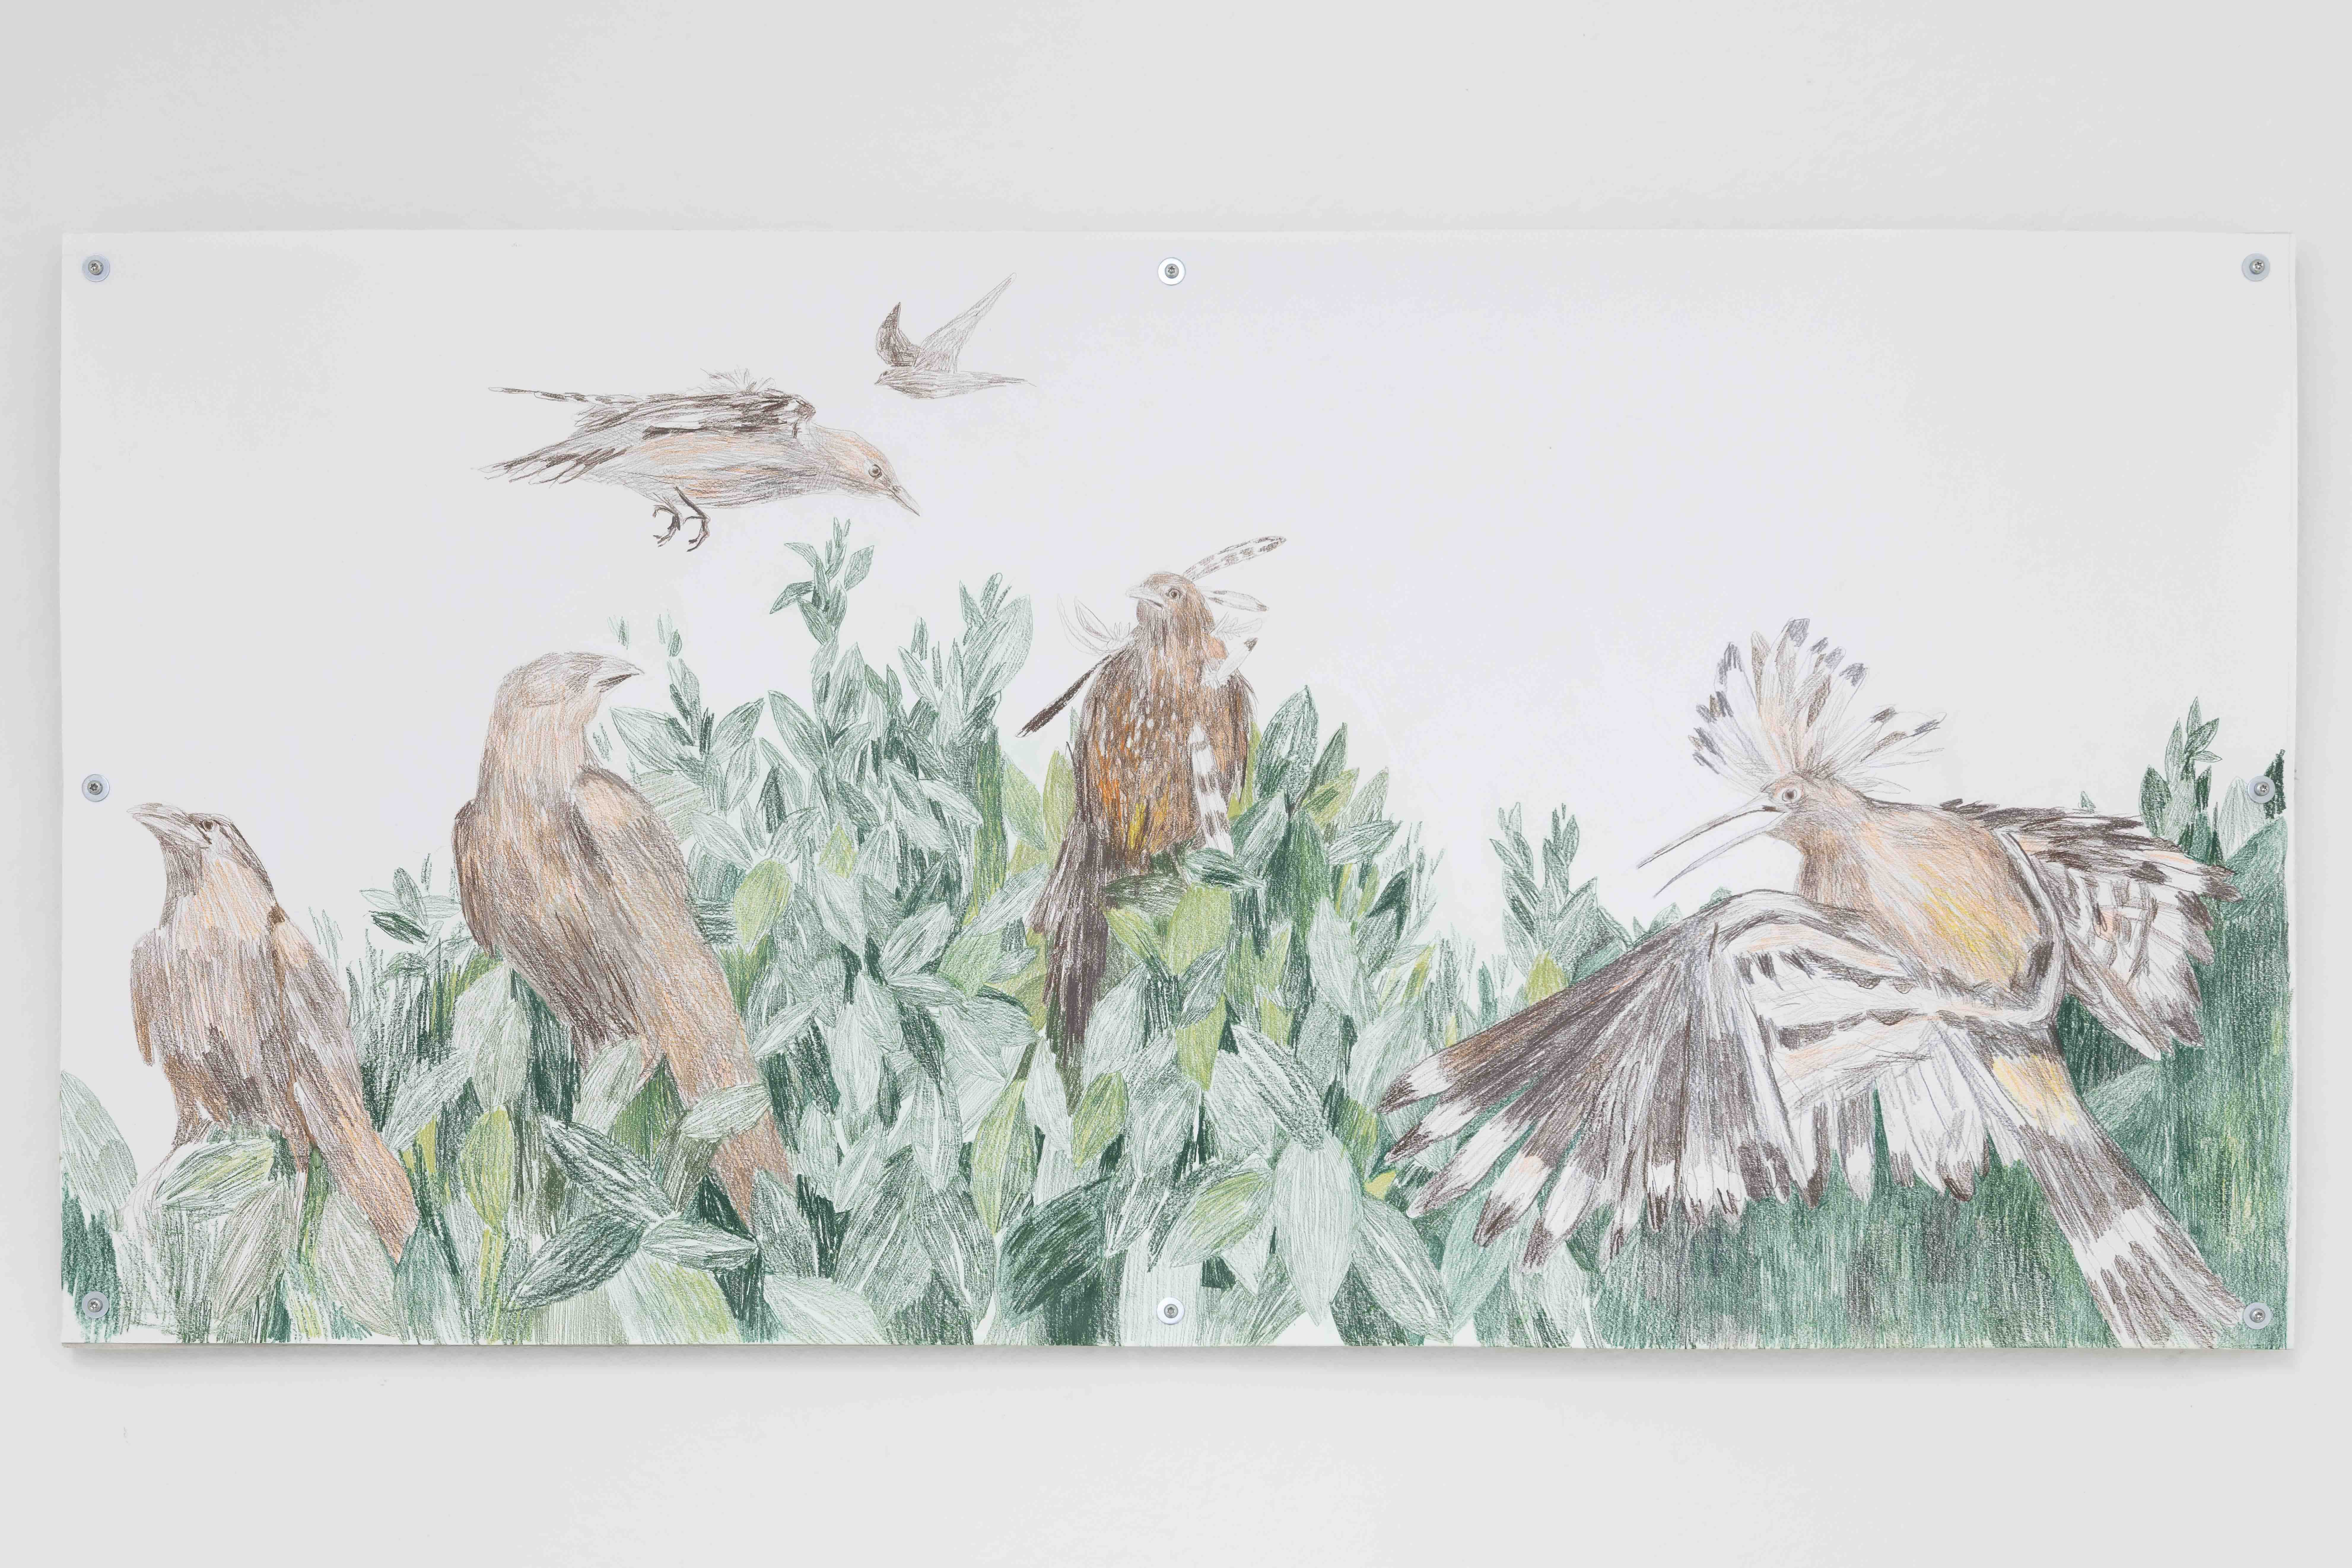 Agnese Galiotto, Of foxes and birds. Stories from the hill. (Top of the tree), 2023, Crayon on paper on drywall mount, 120cm x 60cm